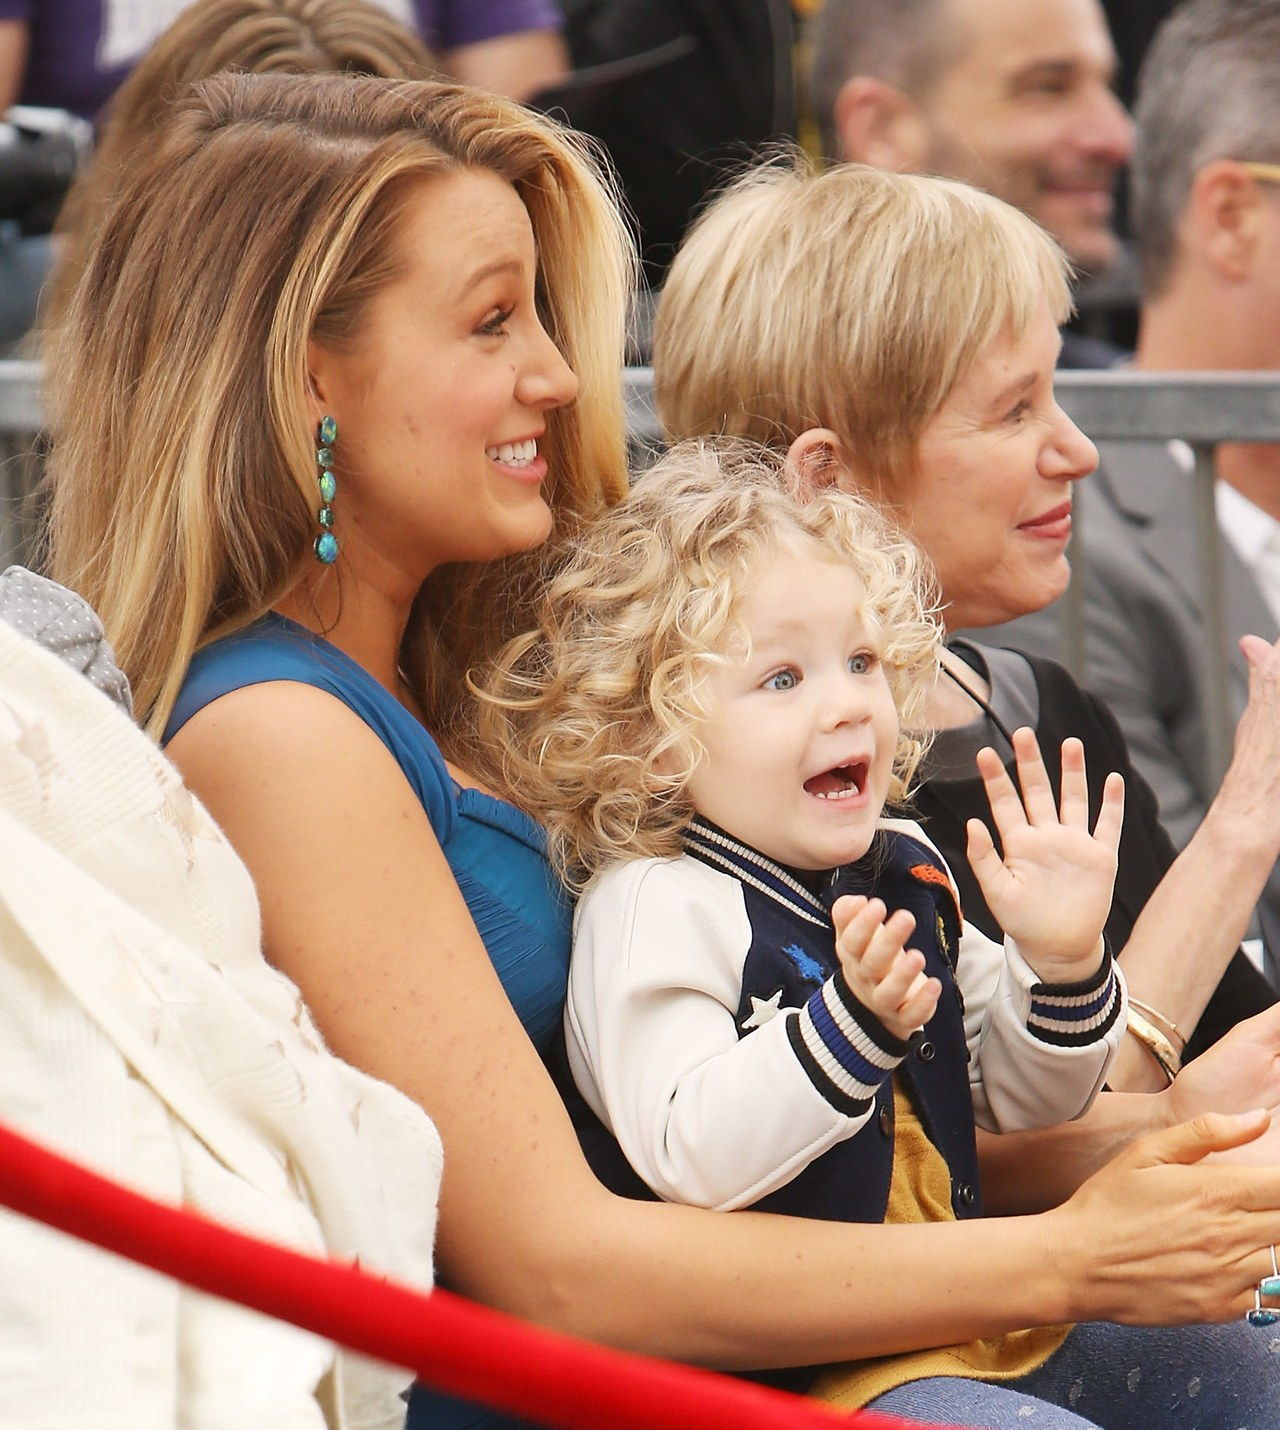 HOLLYWOOD, CA - DECEMBER 15: Blake Lively and her daughter attend the ceremony honoring actor Ryan Reynolds with a Star on The Hollywood Walk of Fame held on December 15, 2016 in Hollywood, California. (Photo by Michael Tran/FilmMagic)